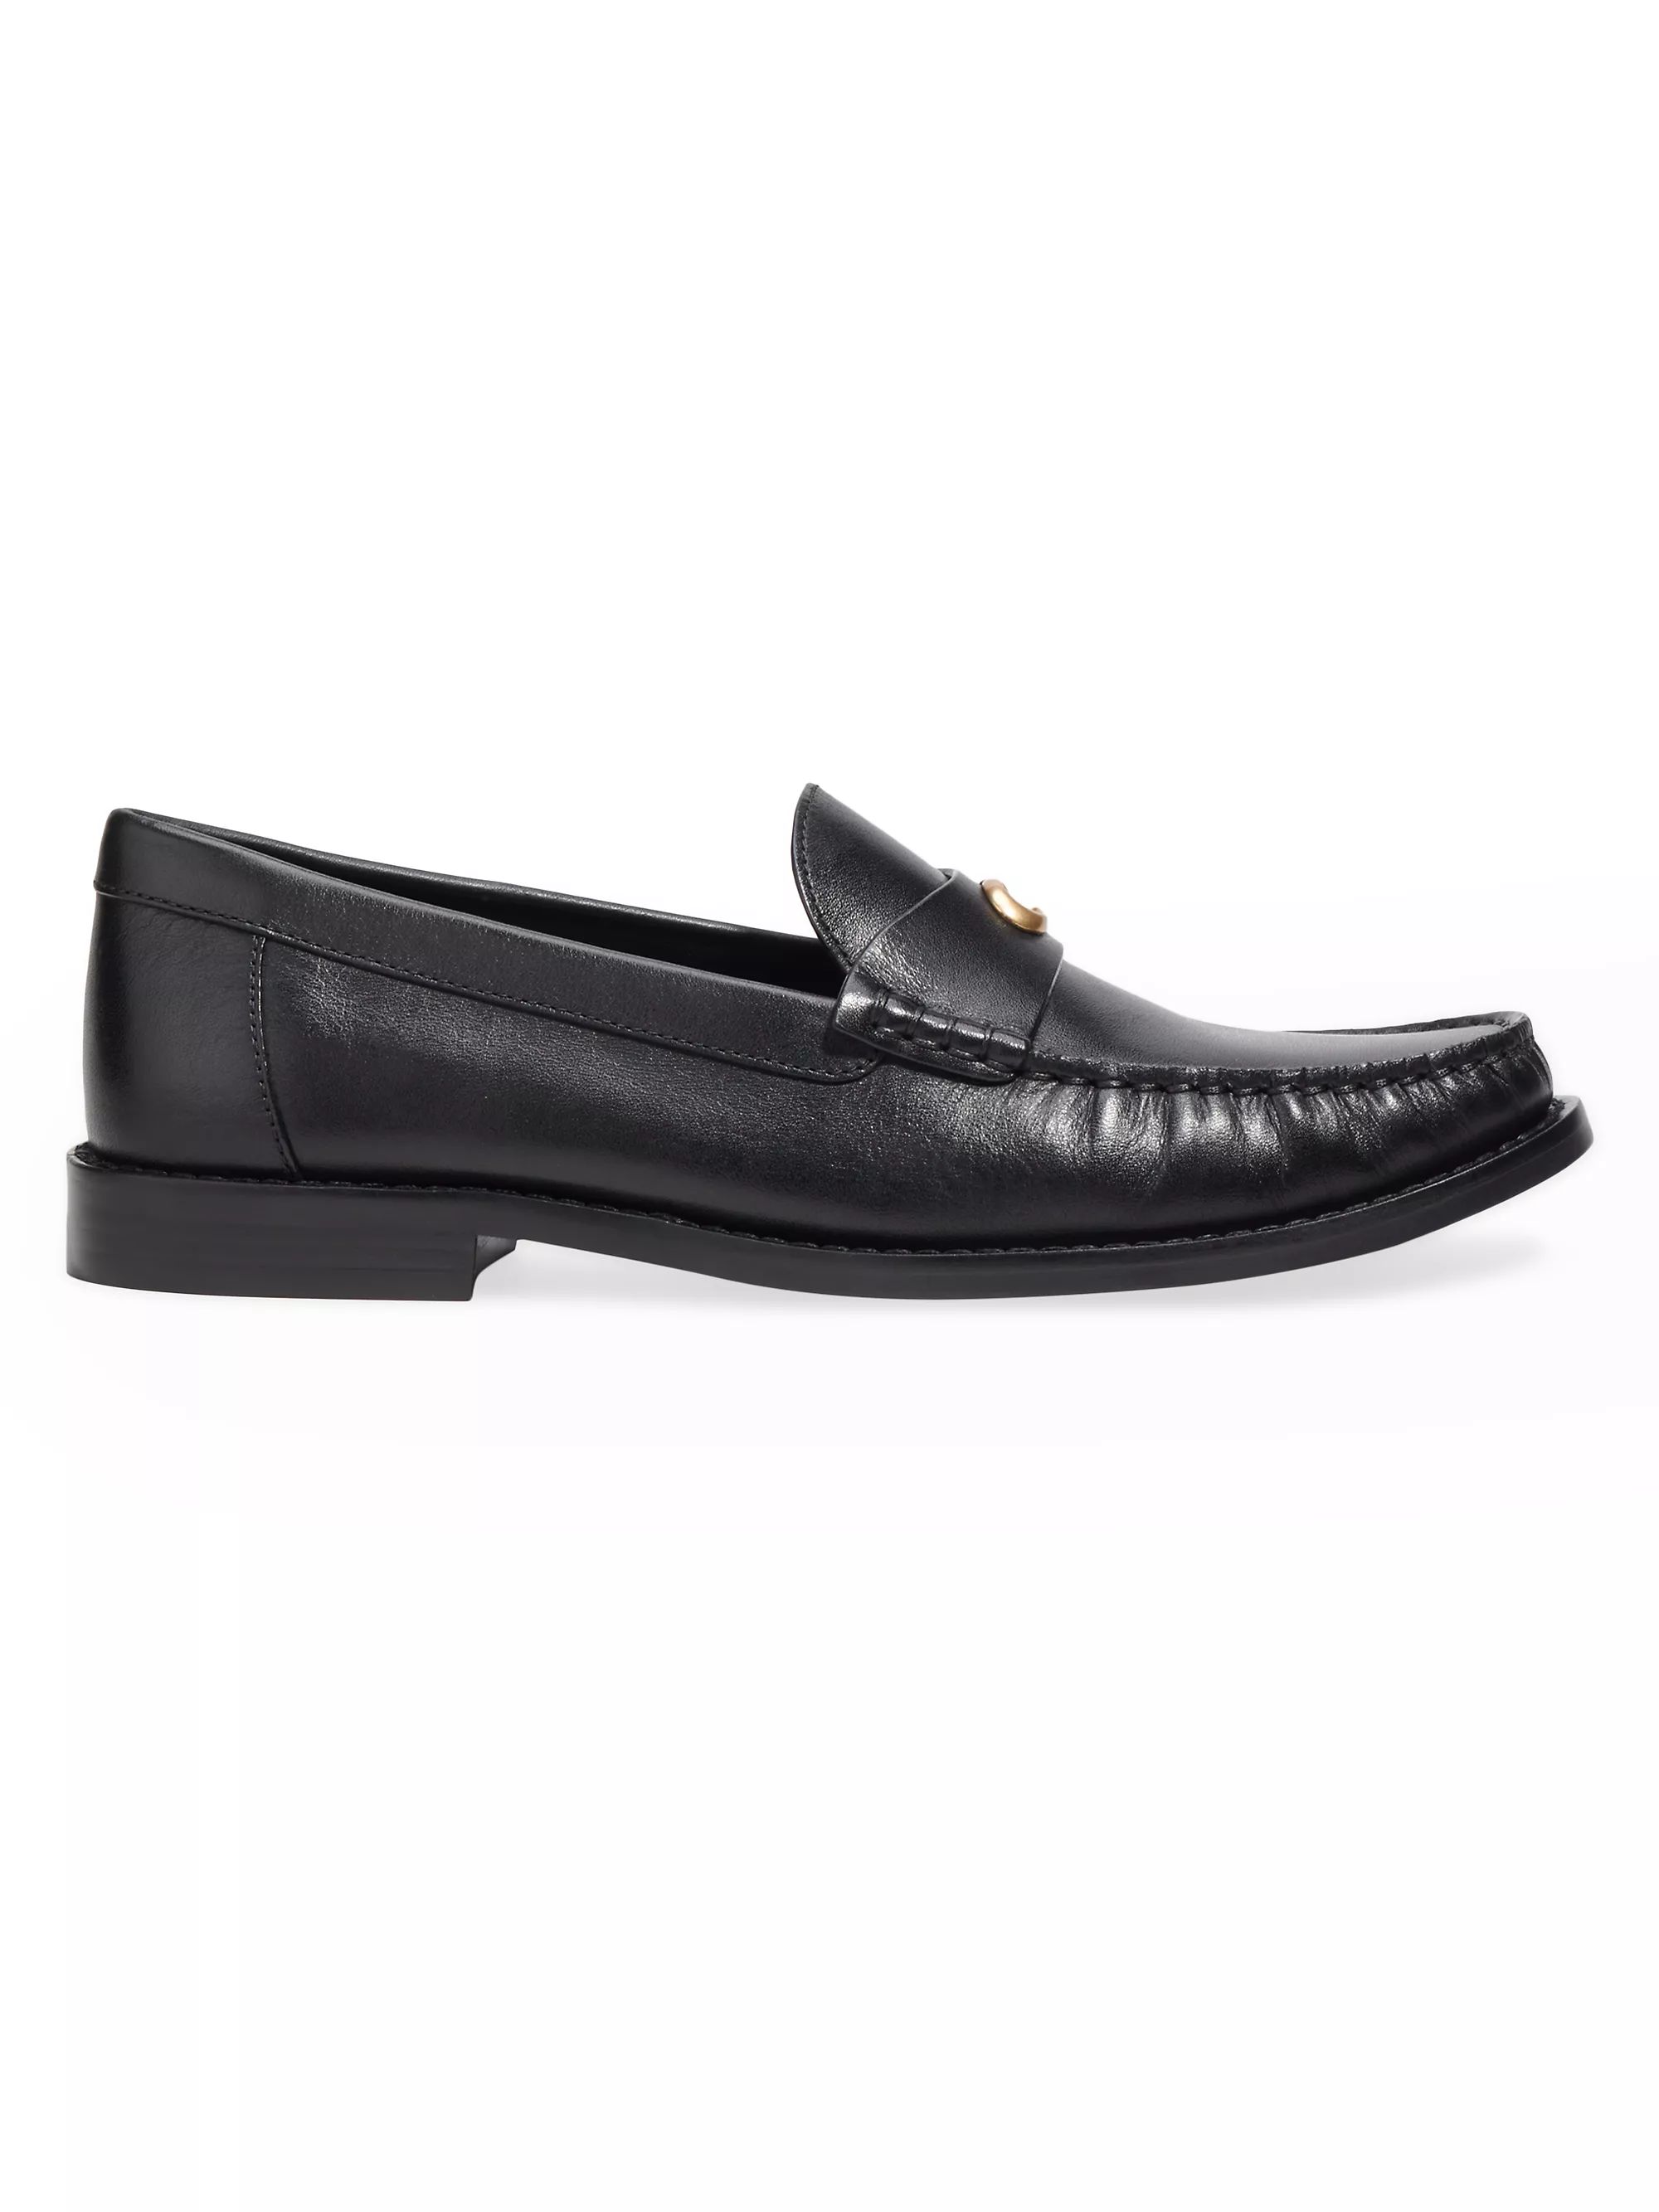 BlackAll Oxfords & LoafersCOACHJolene 12MM Leather LoaferRating: 1 out of 5 stars1$175SELECT SIZE... | Saks Fifth Avenue